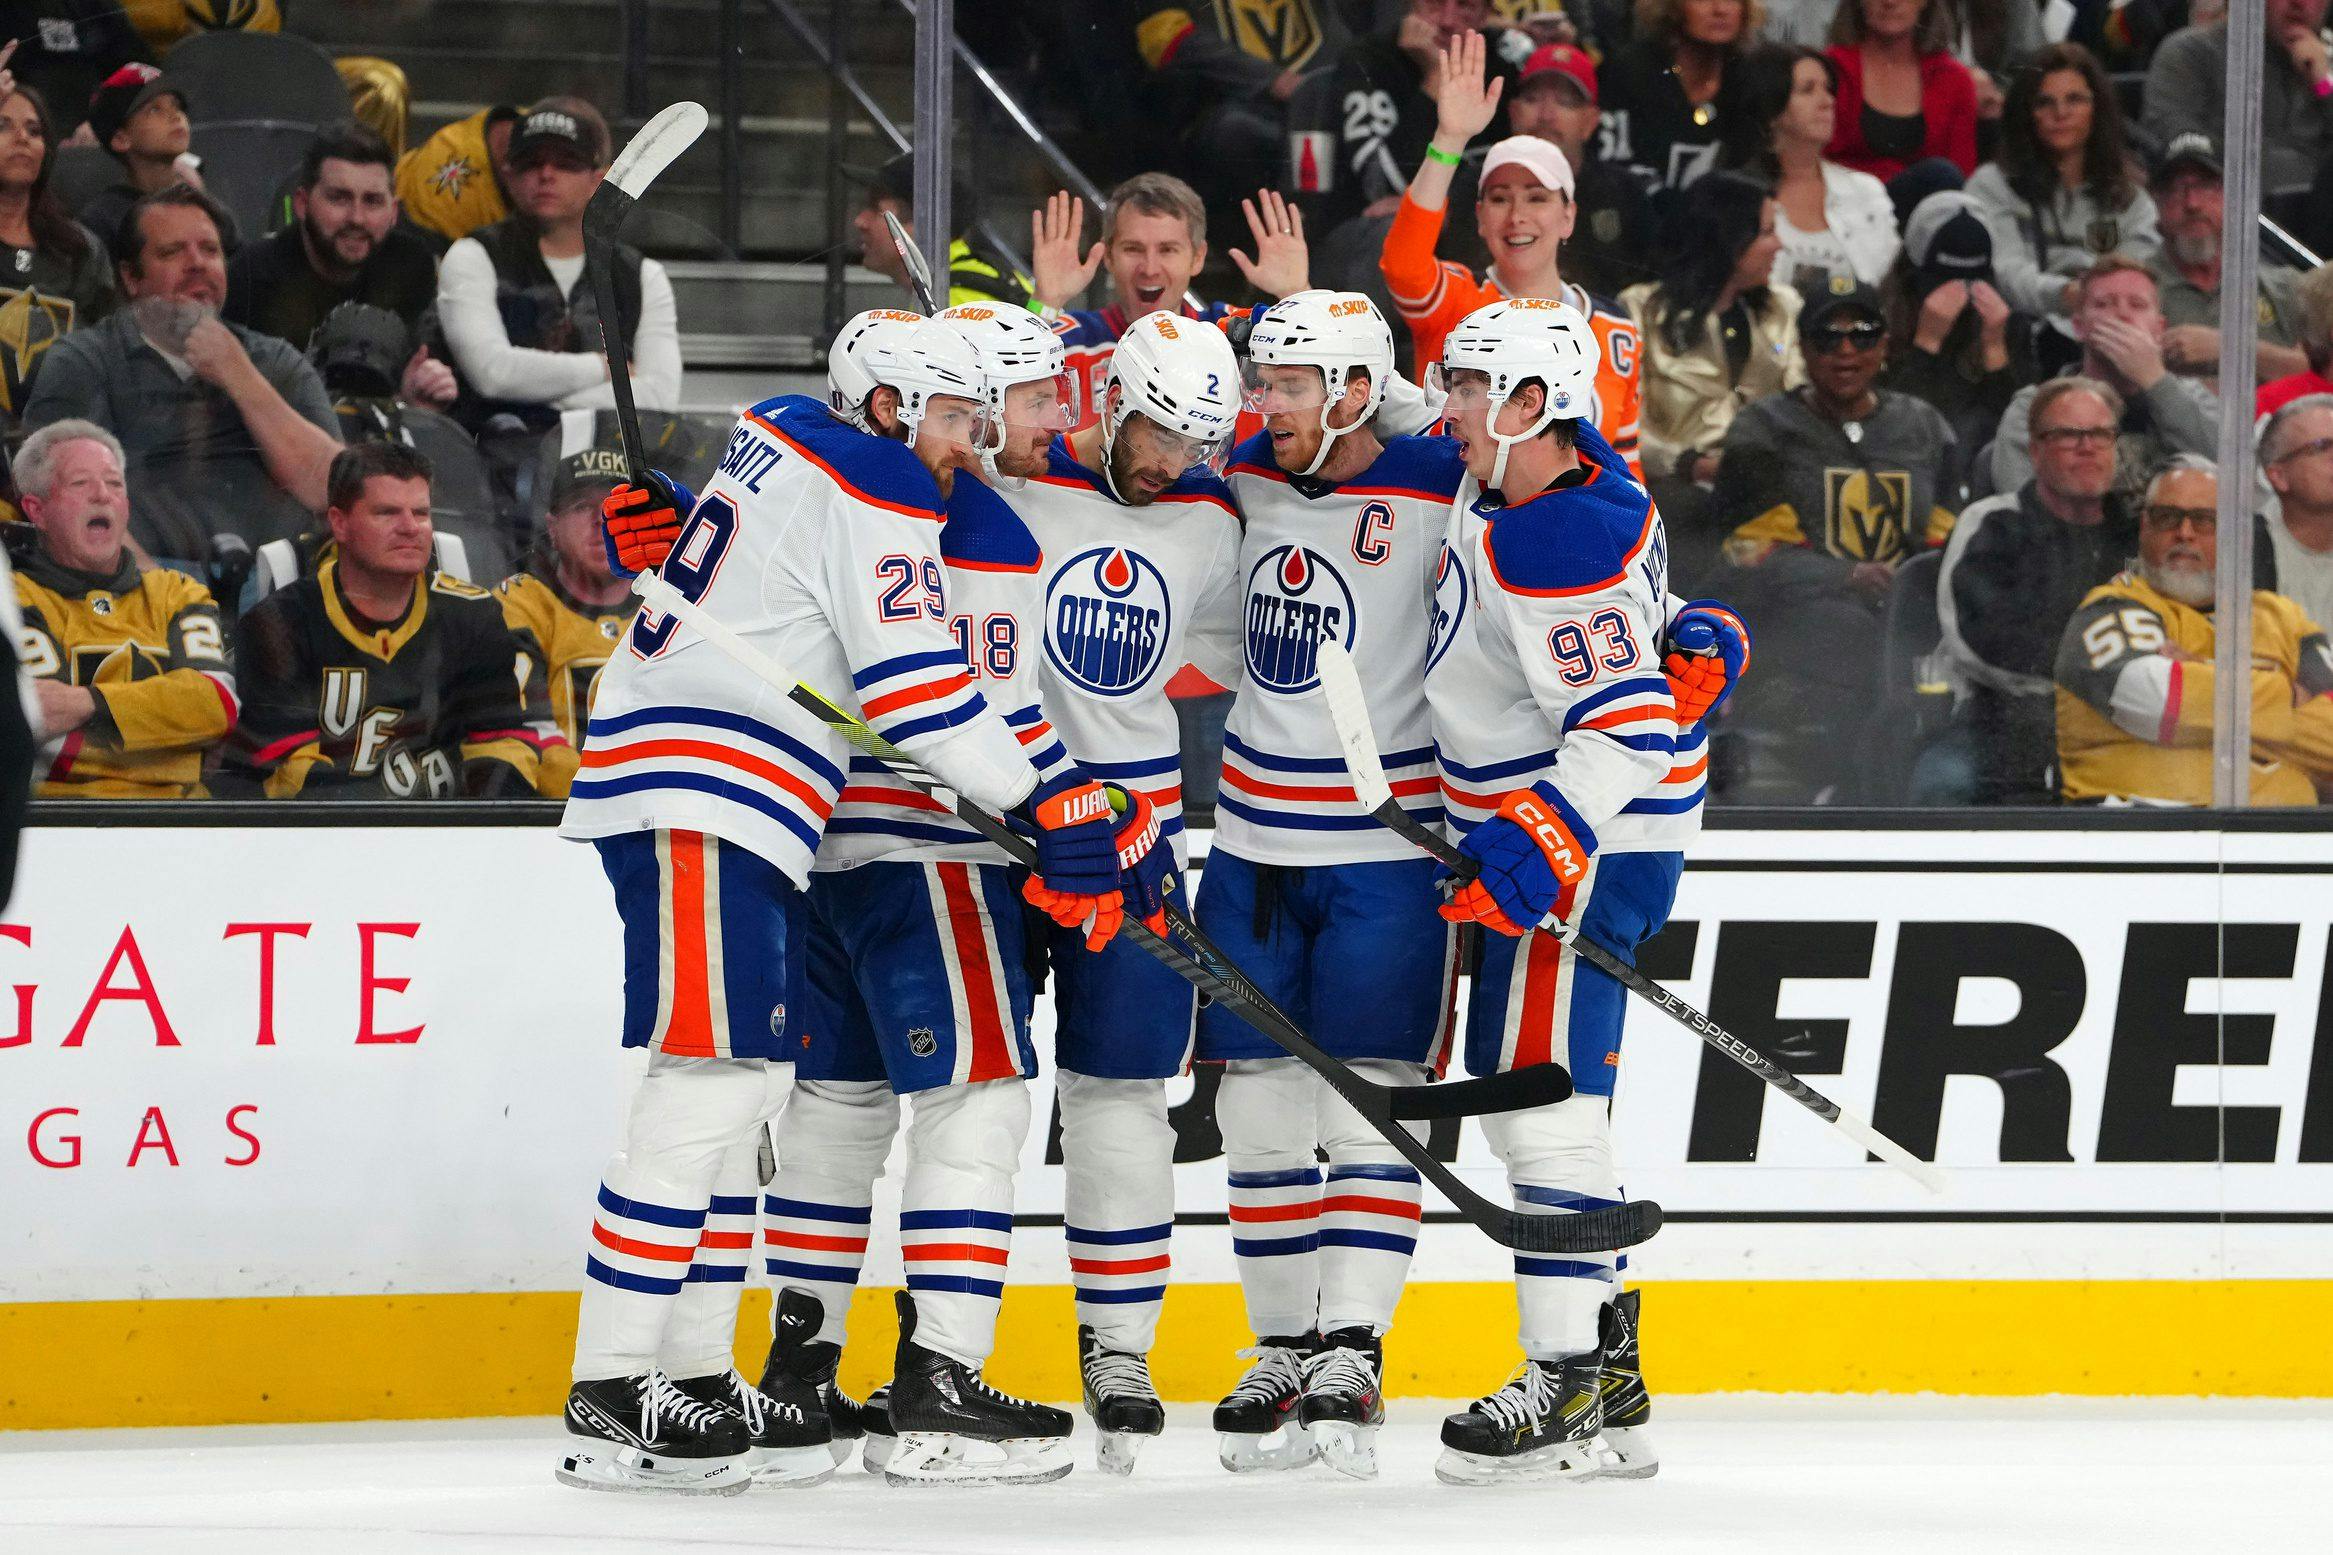 Stanley Cup Playoffs Day 19: Connor McDavid & Leon Draisaitl score two goals each in Oilers’ 5-1 blowout win